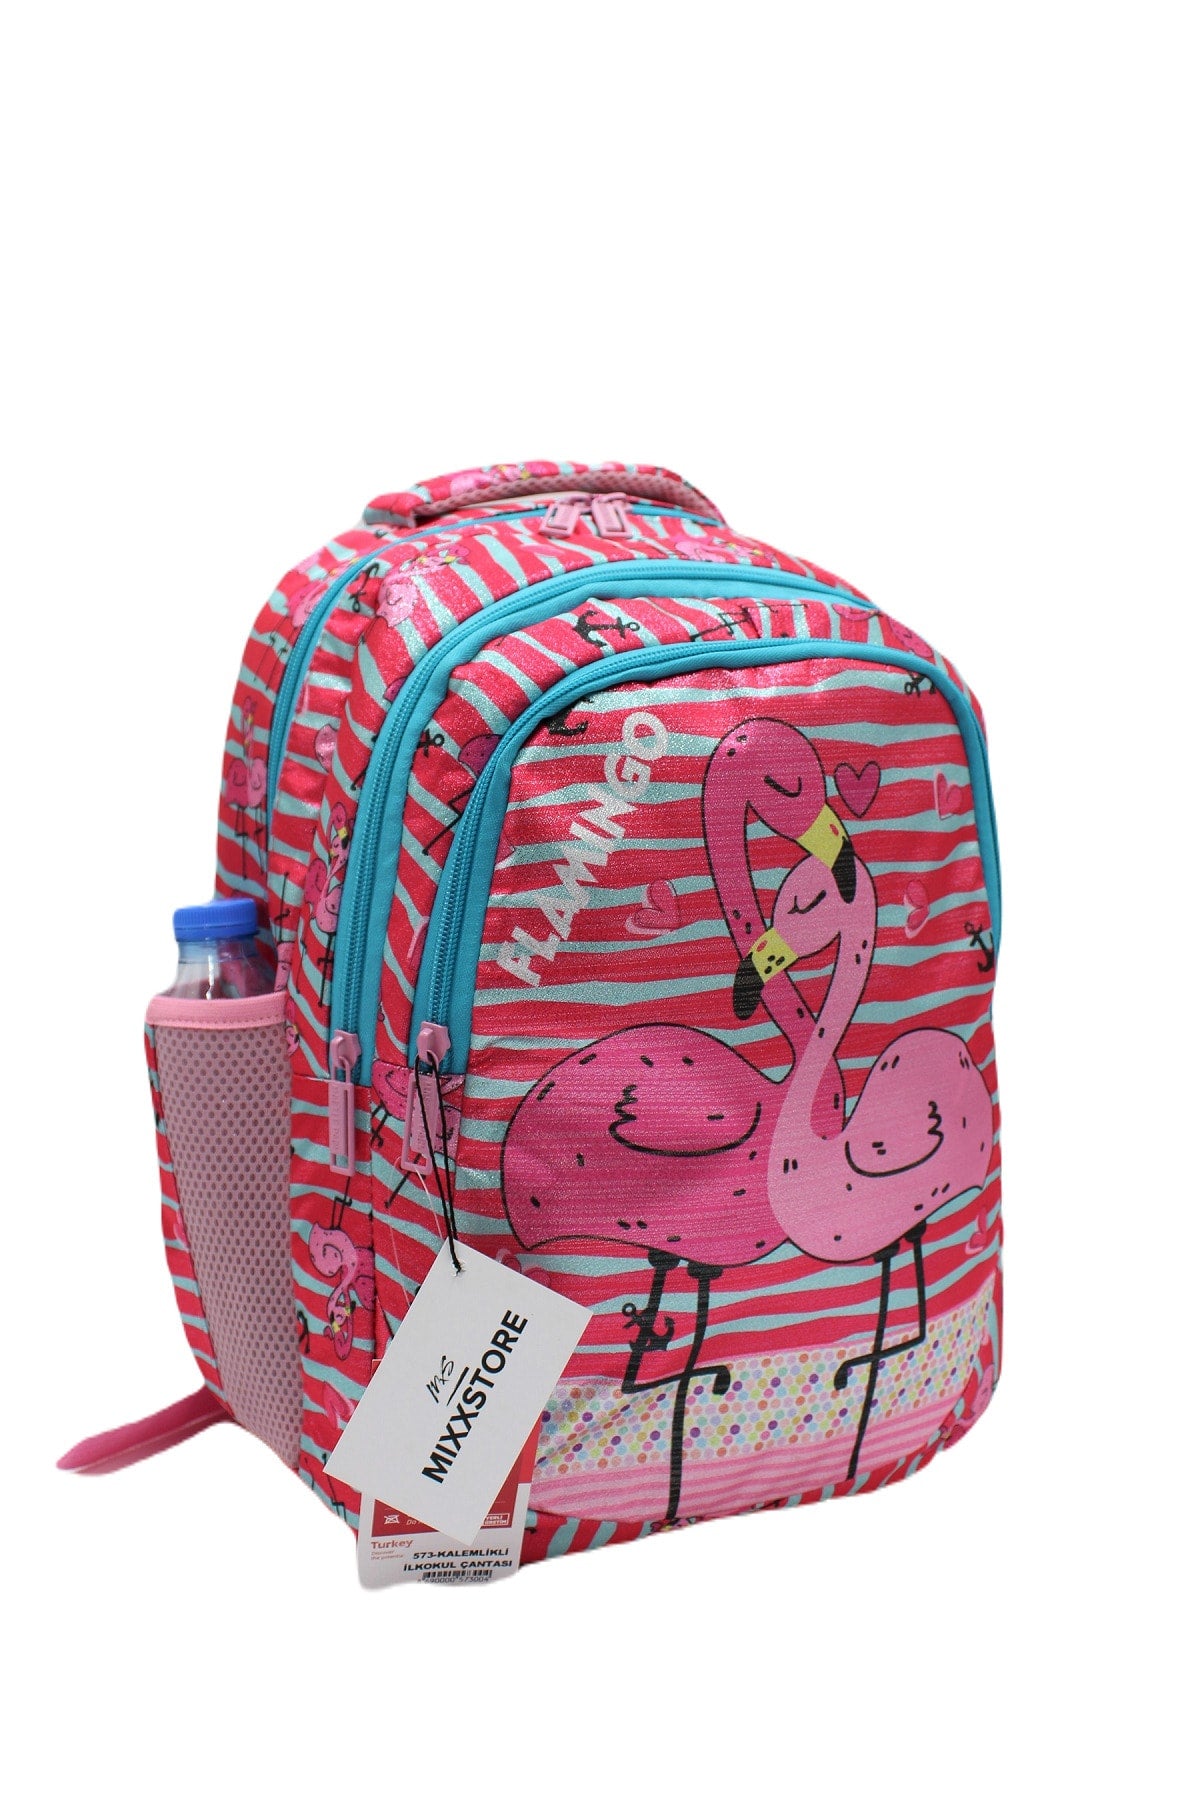 Sim Flamingo Patterned Fuchsia Color Girl Backpack Primary School Bag Set with Nutrient and Pencil Holder